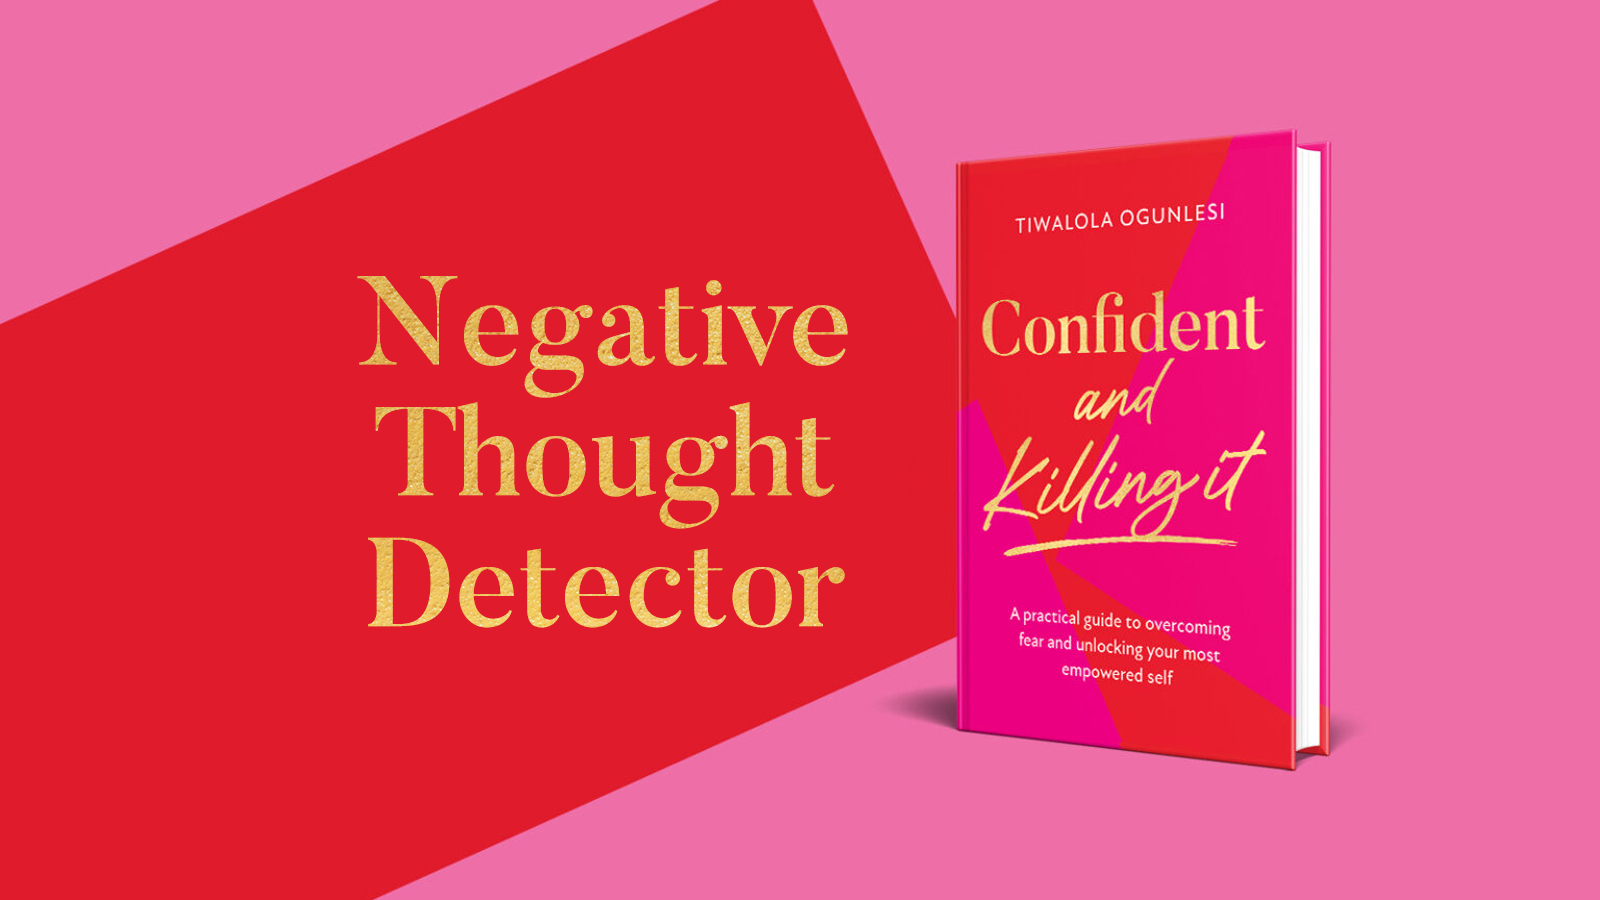 Negative Thought Detector - Confident And Killing It